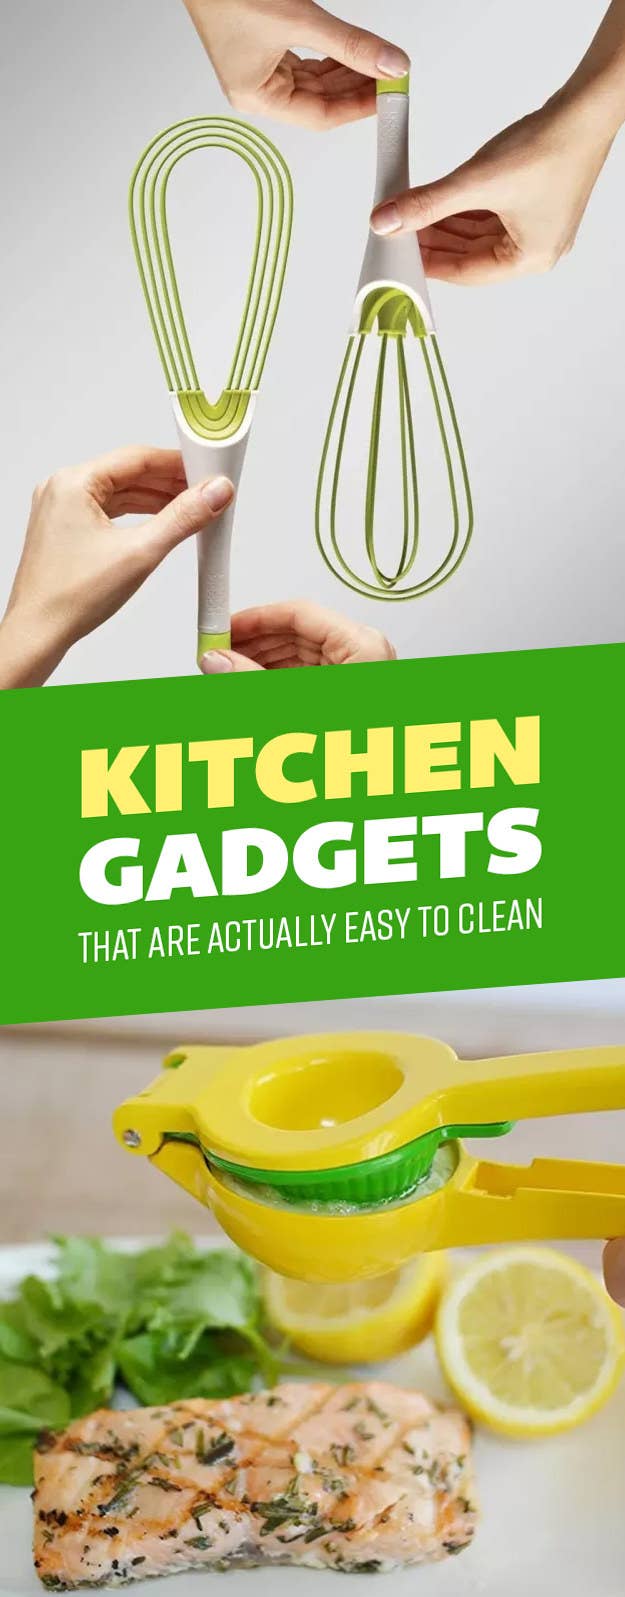 9 tips to clean the kitchen gadgets